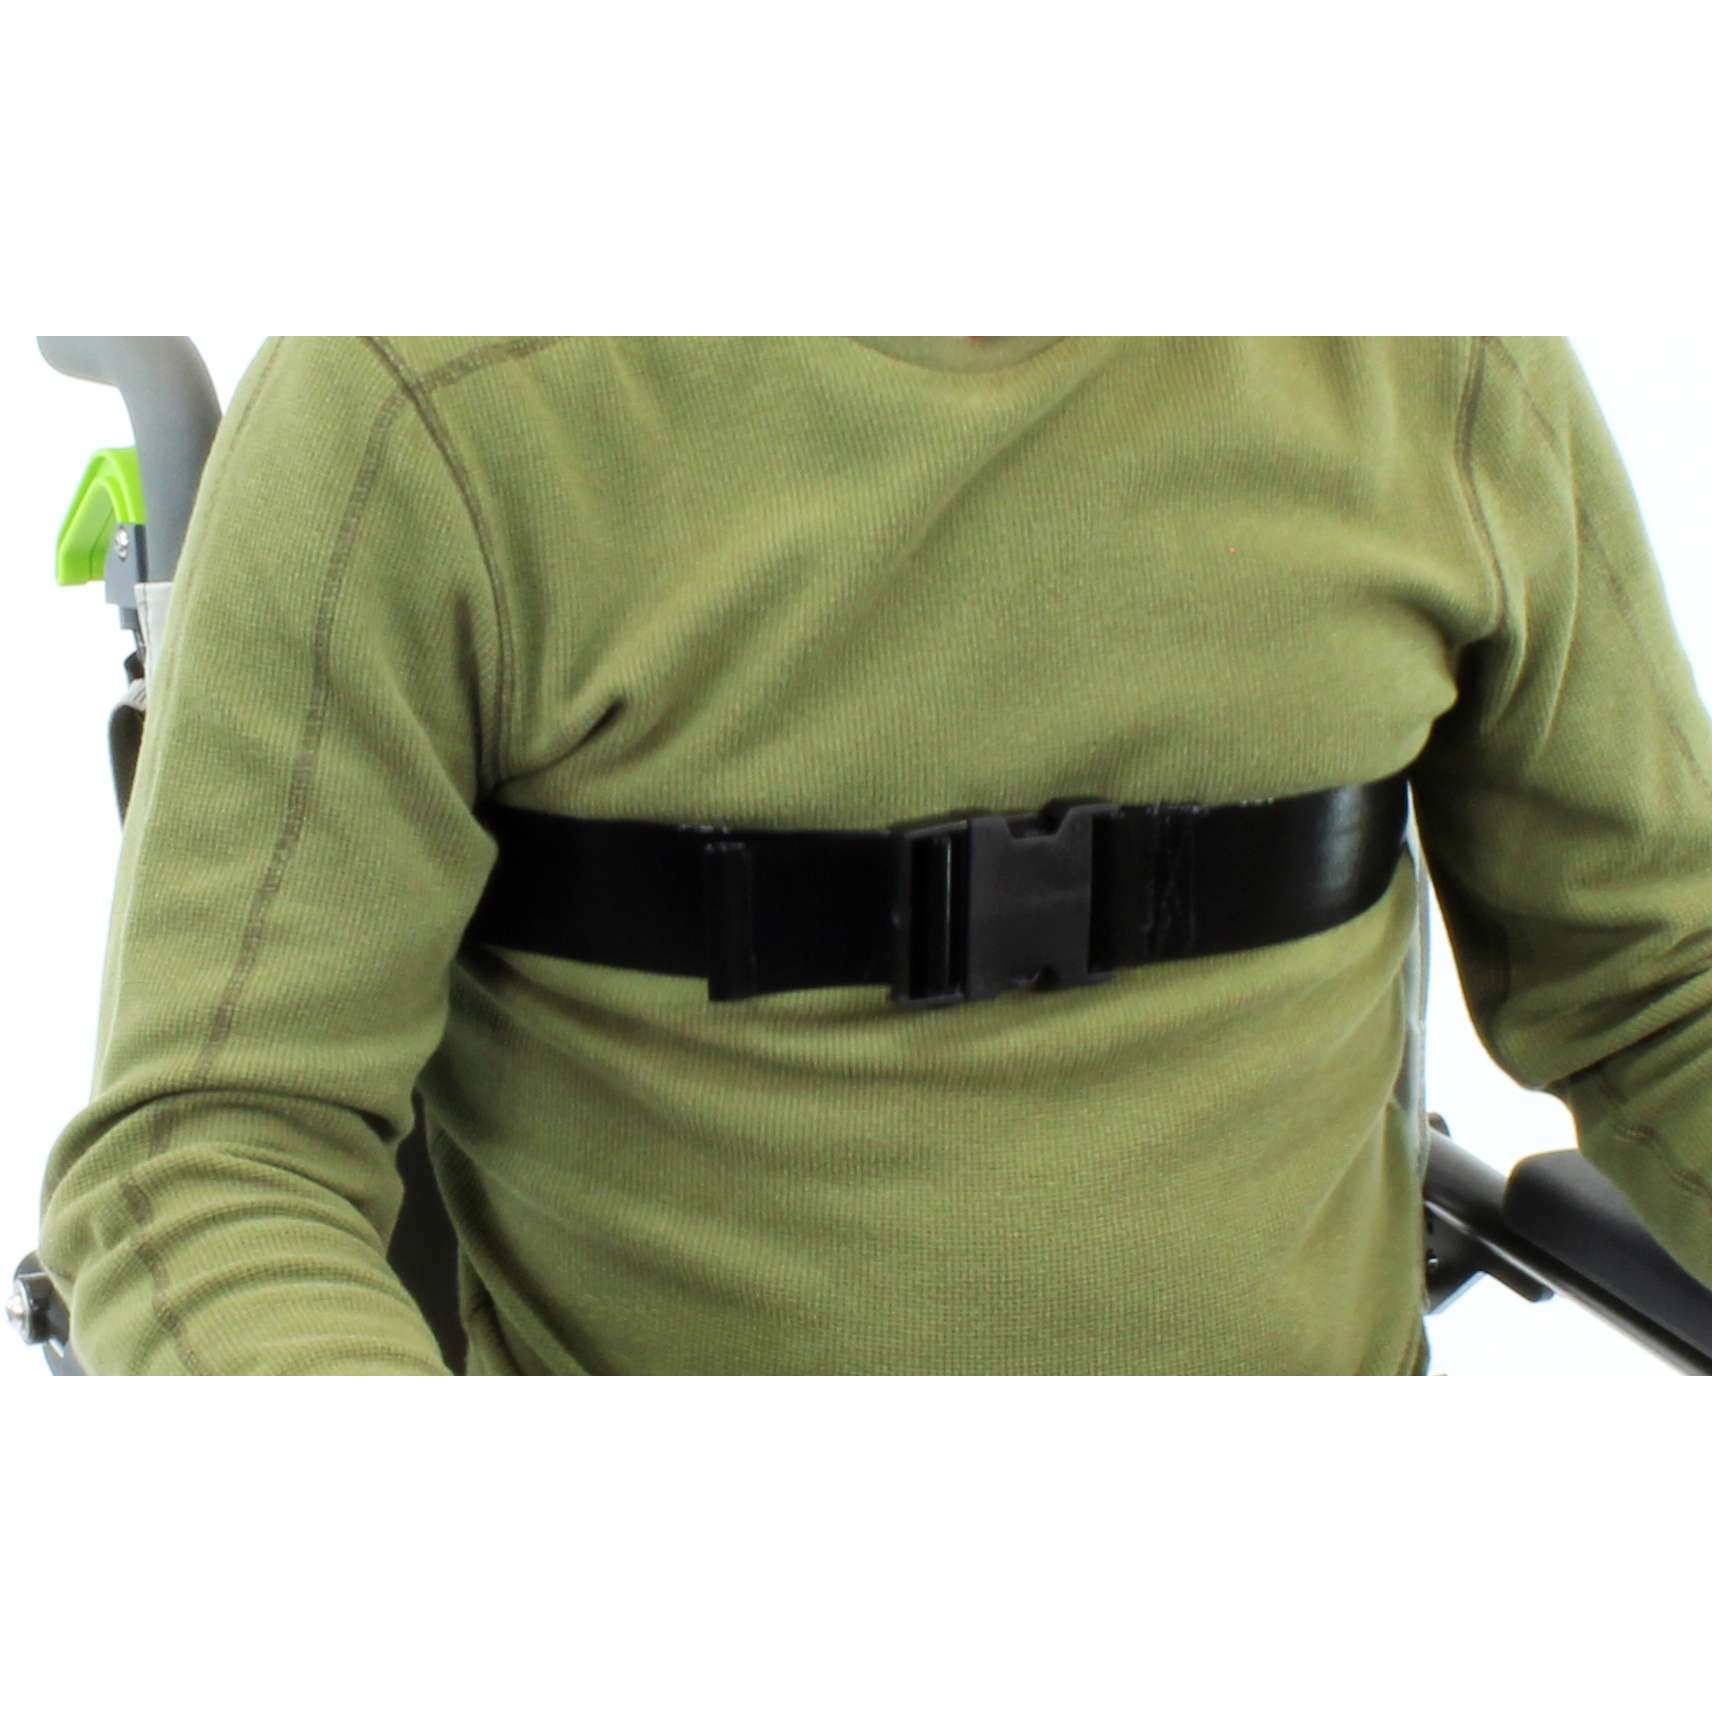 Infection Control Chest Belt - Extra Large (1 piece with side release buckle) (for 22" - 30" back frame widths) (ZCBICXL)